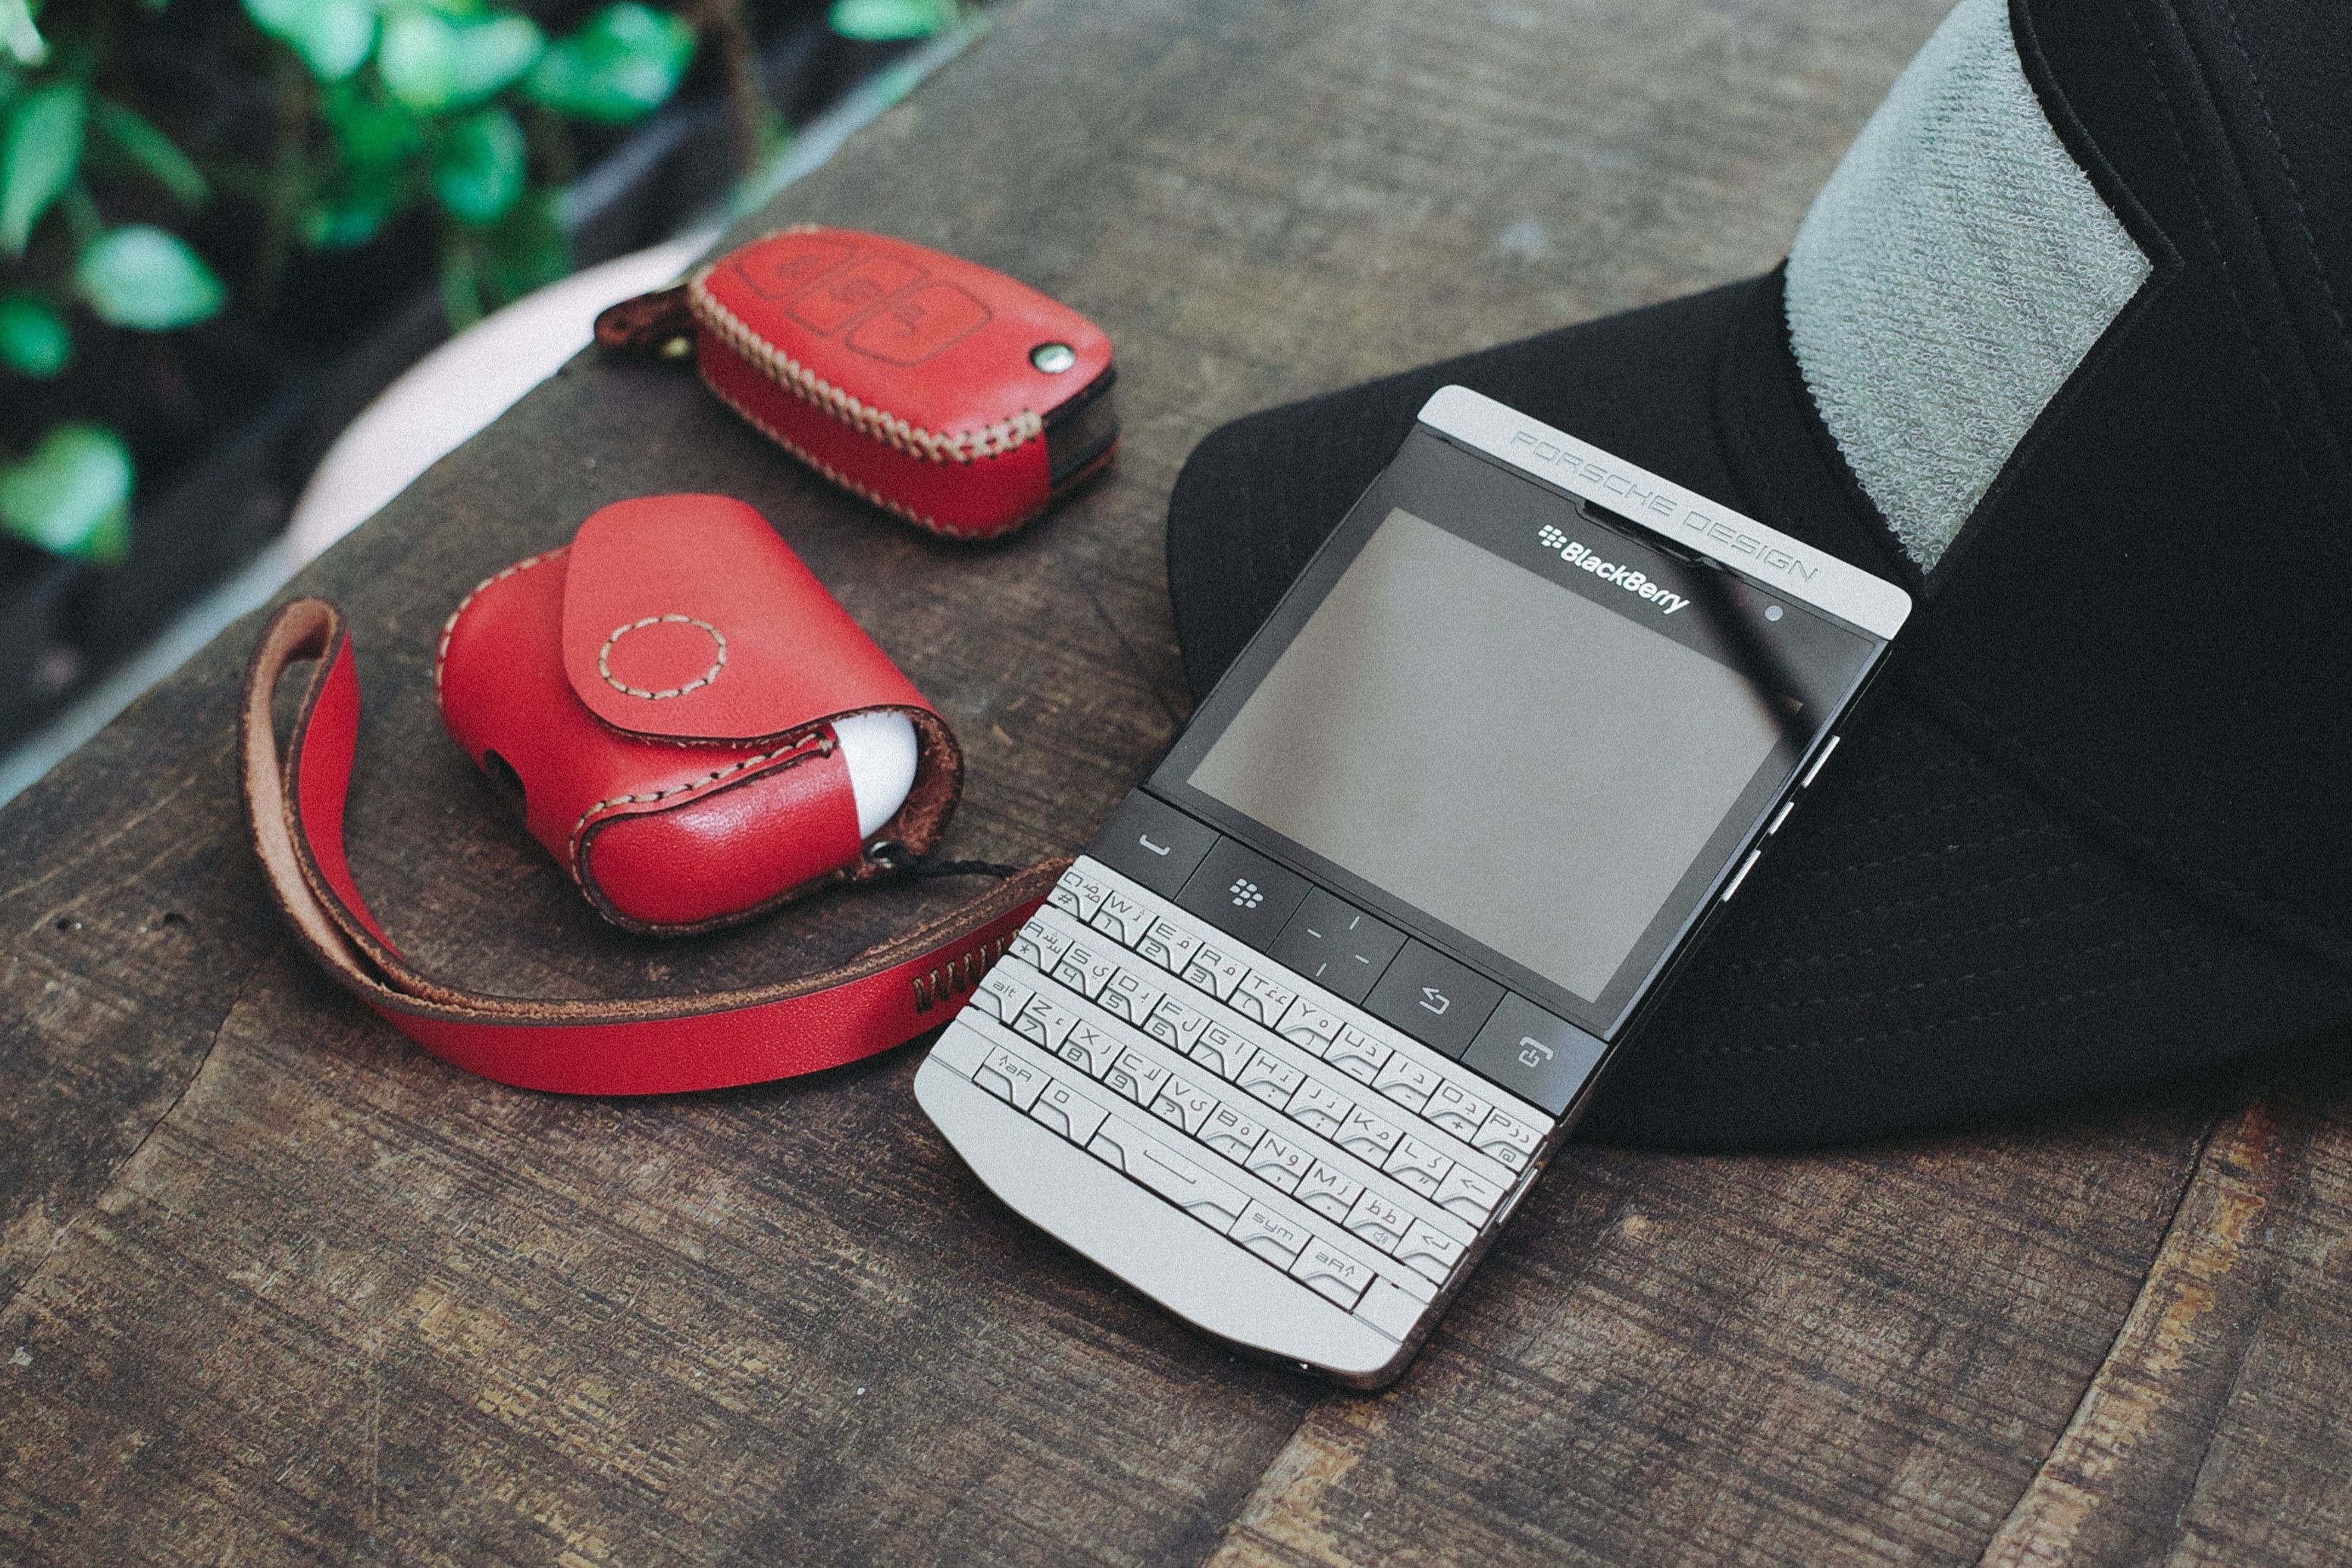 A BlackBerry phone and accessories.